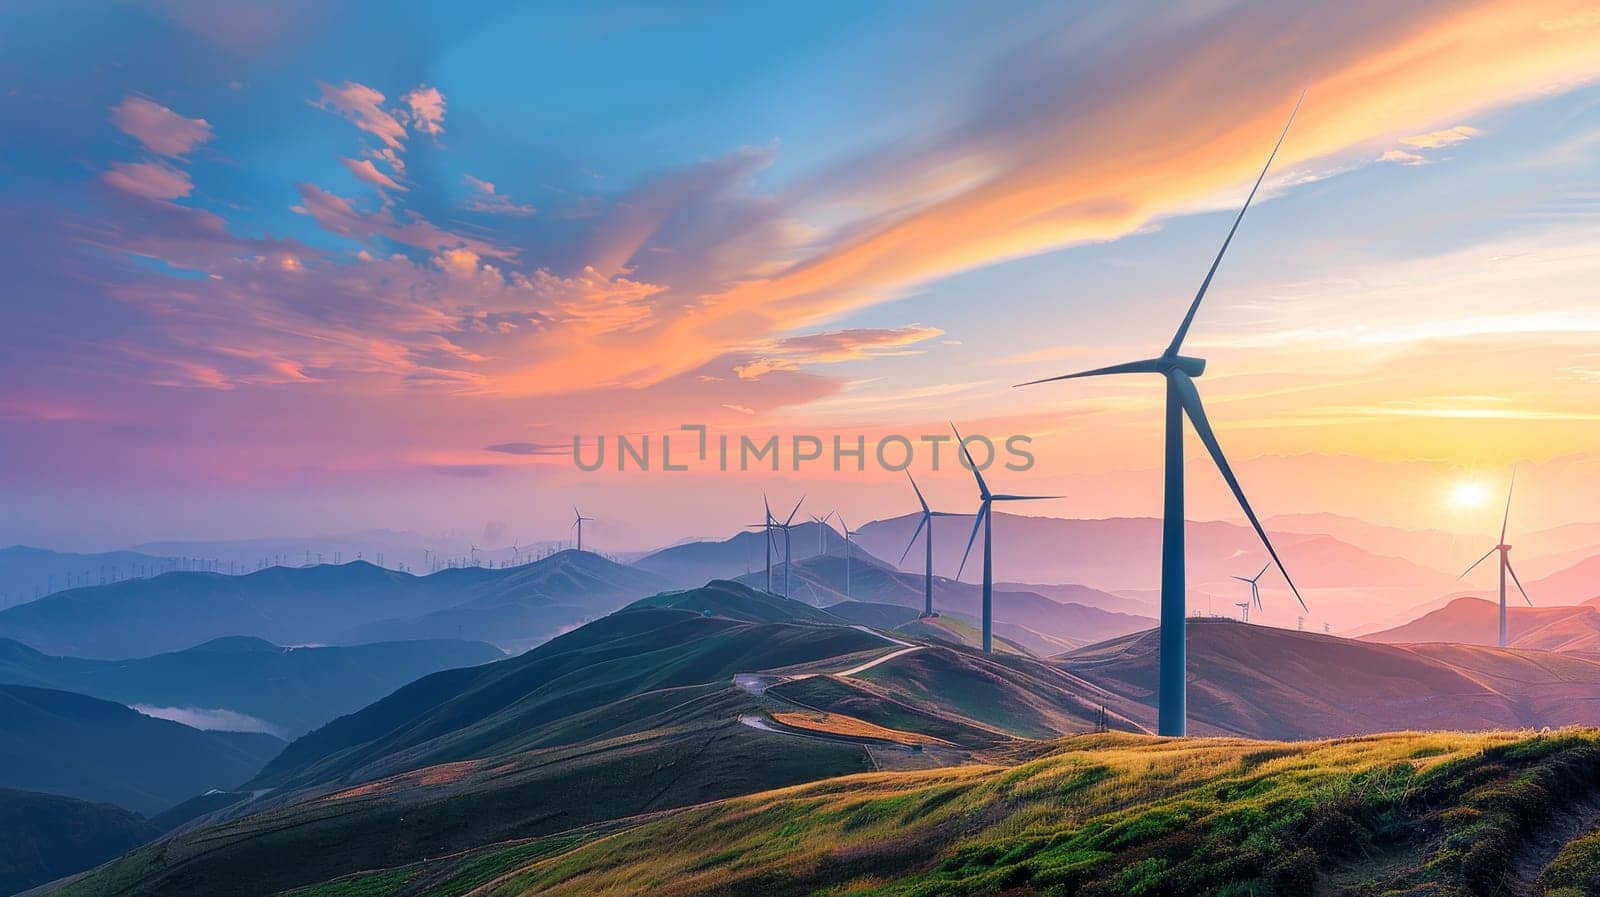 A field of wind turbines with the sun setting in the background by itchaznong